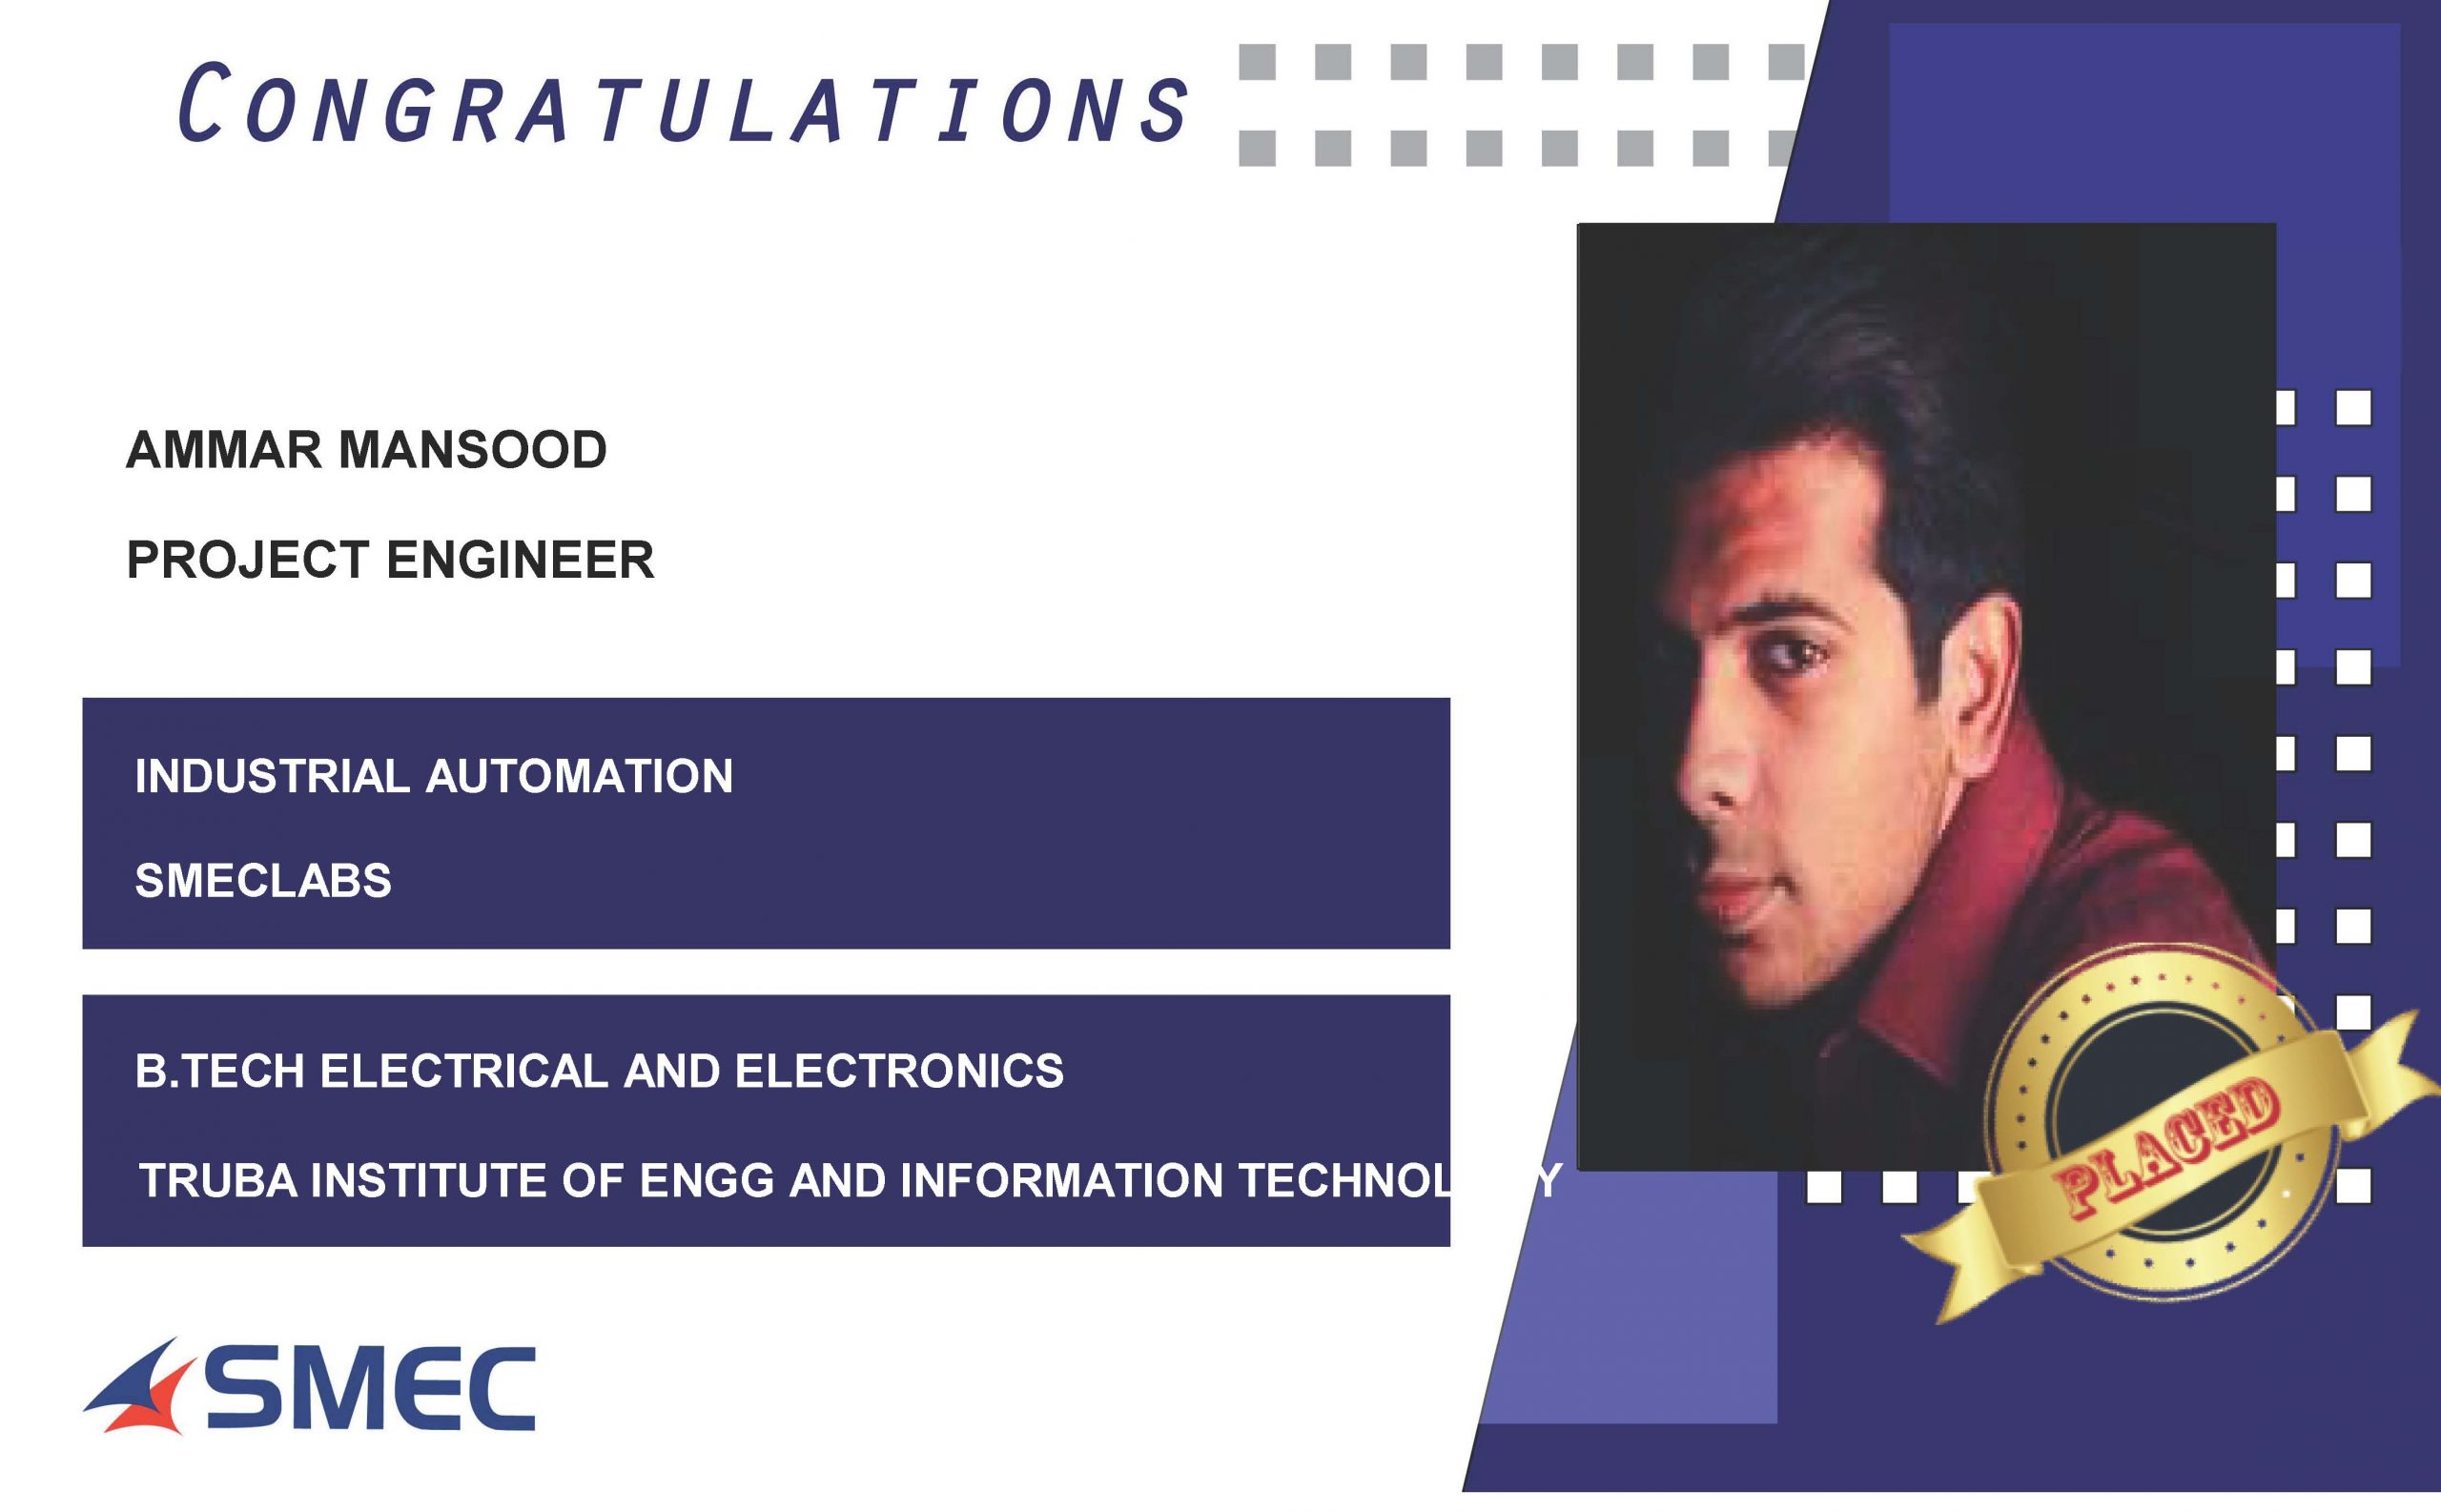 Ammar Mansood Placed Successfully as Industrial Automation Engineer